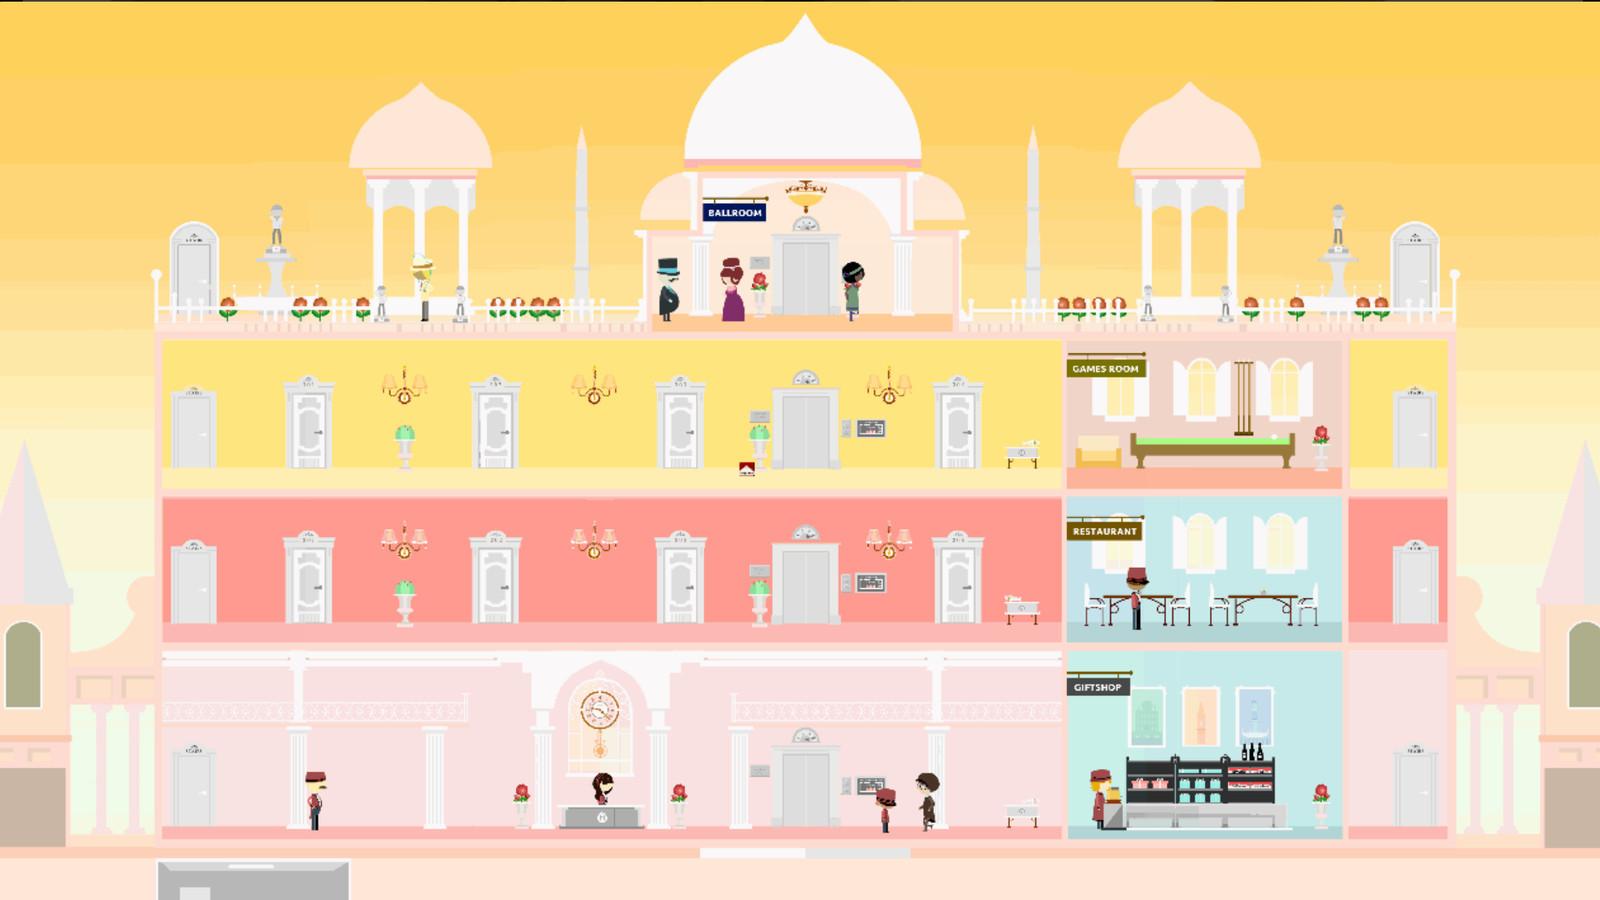 This computer game takes you into Wes Anderson's Grand Budapest